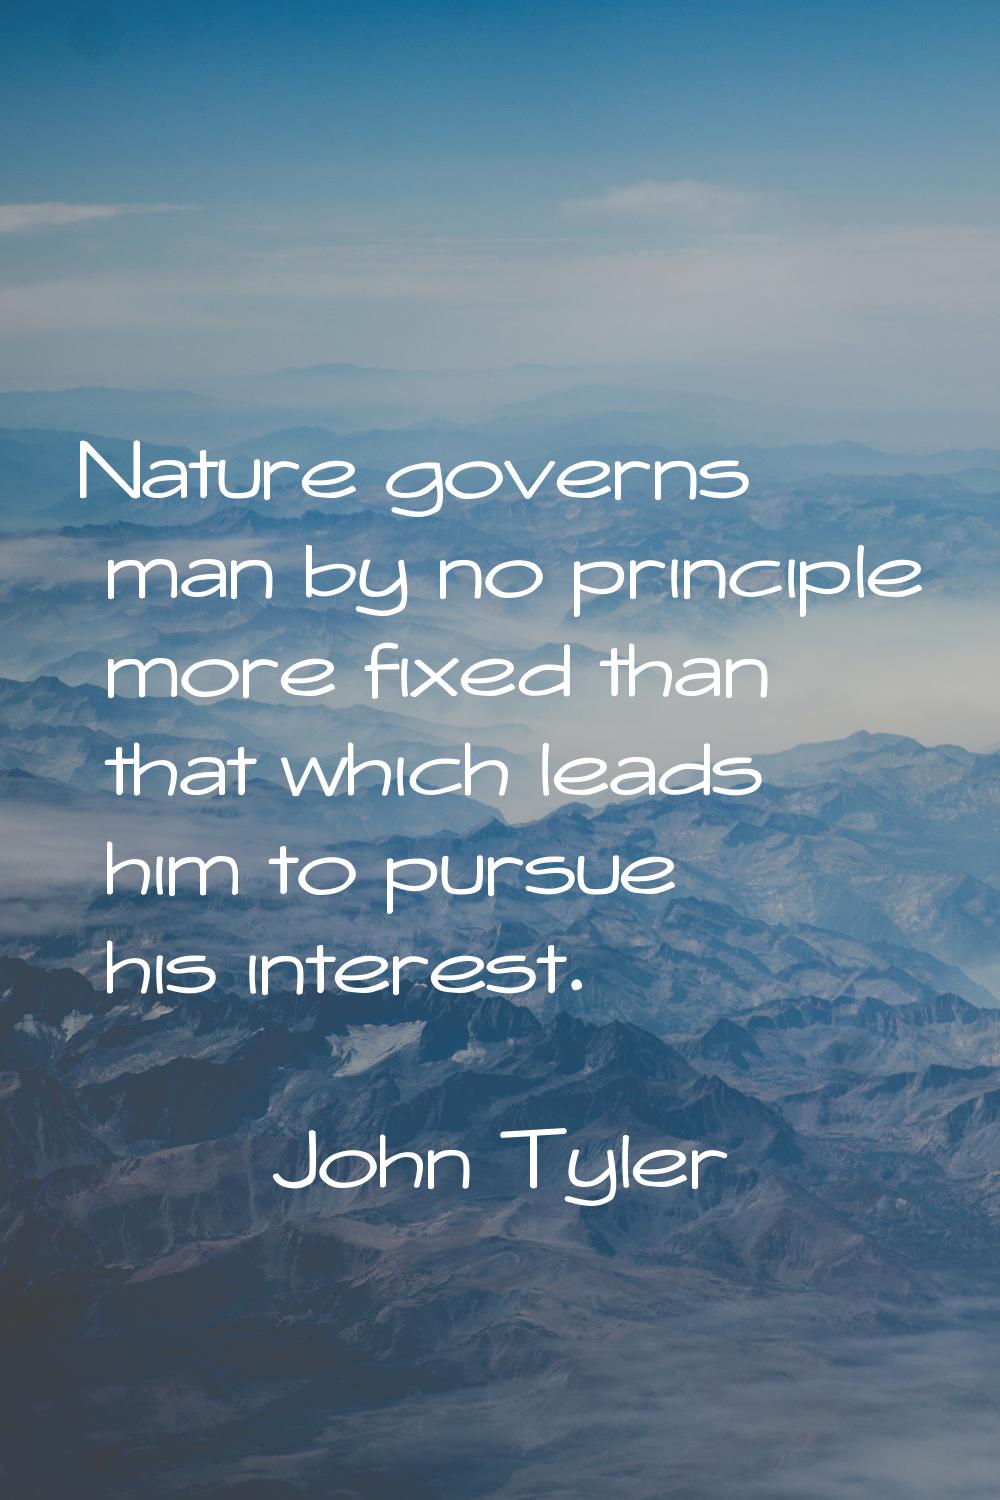 Nature governs man by no principle more fixed than that which leads him to pursue his interest.